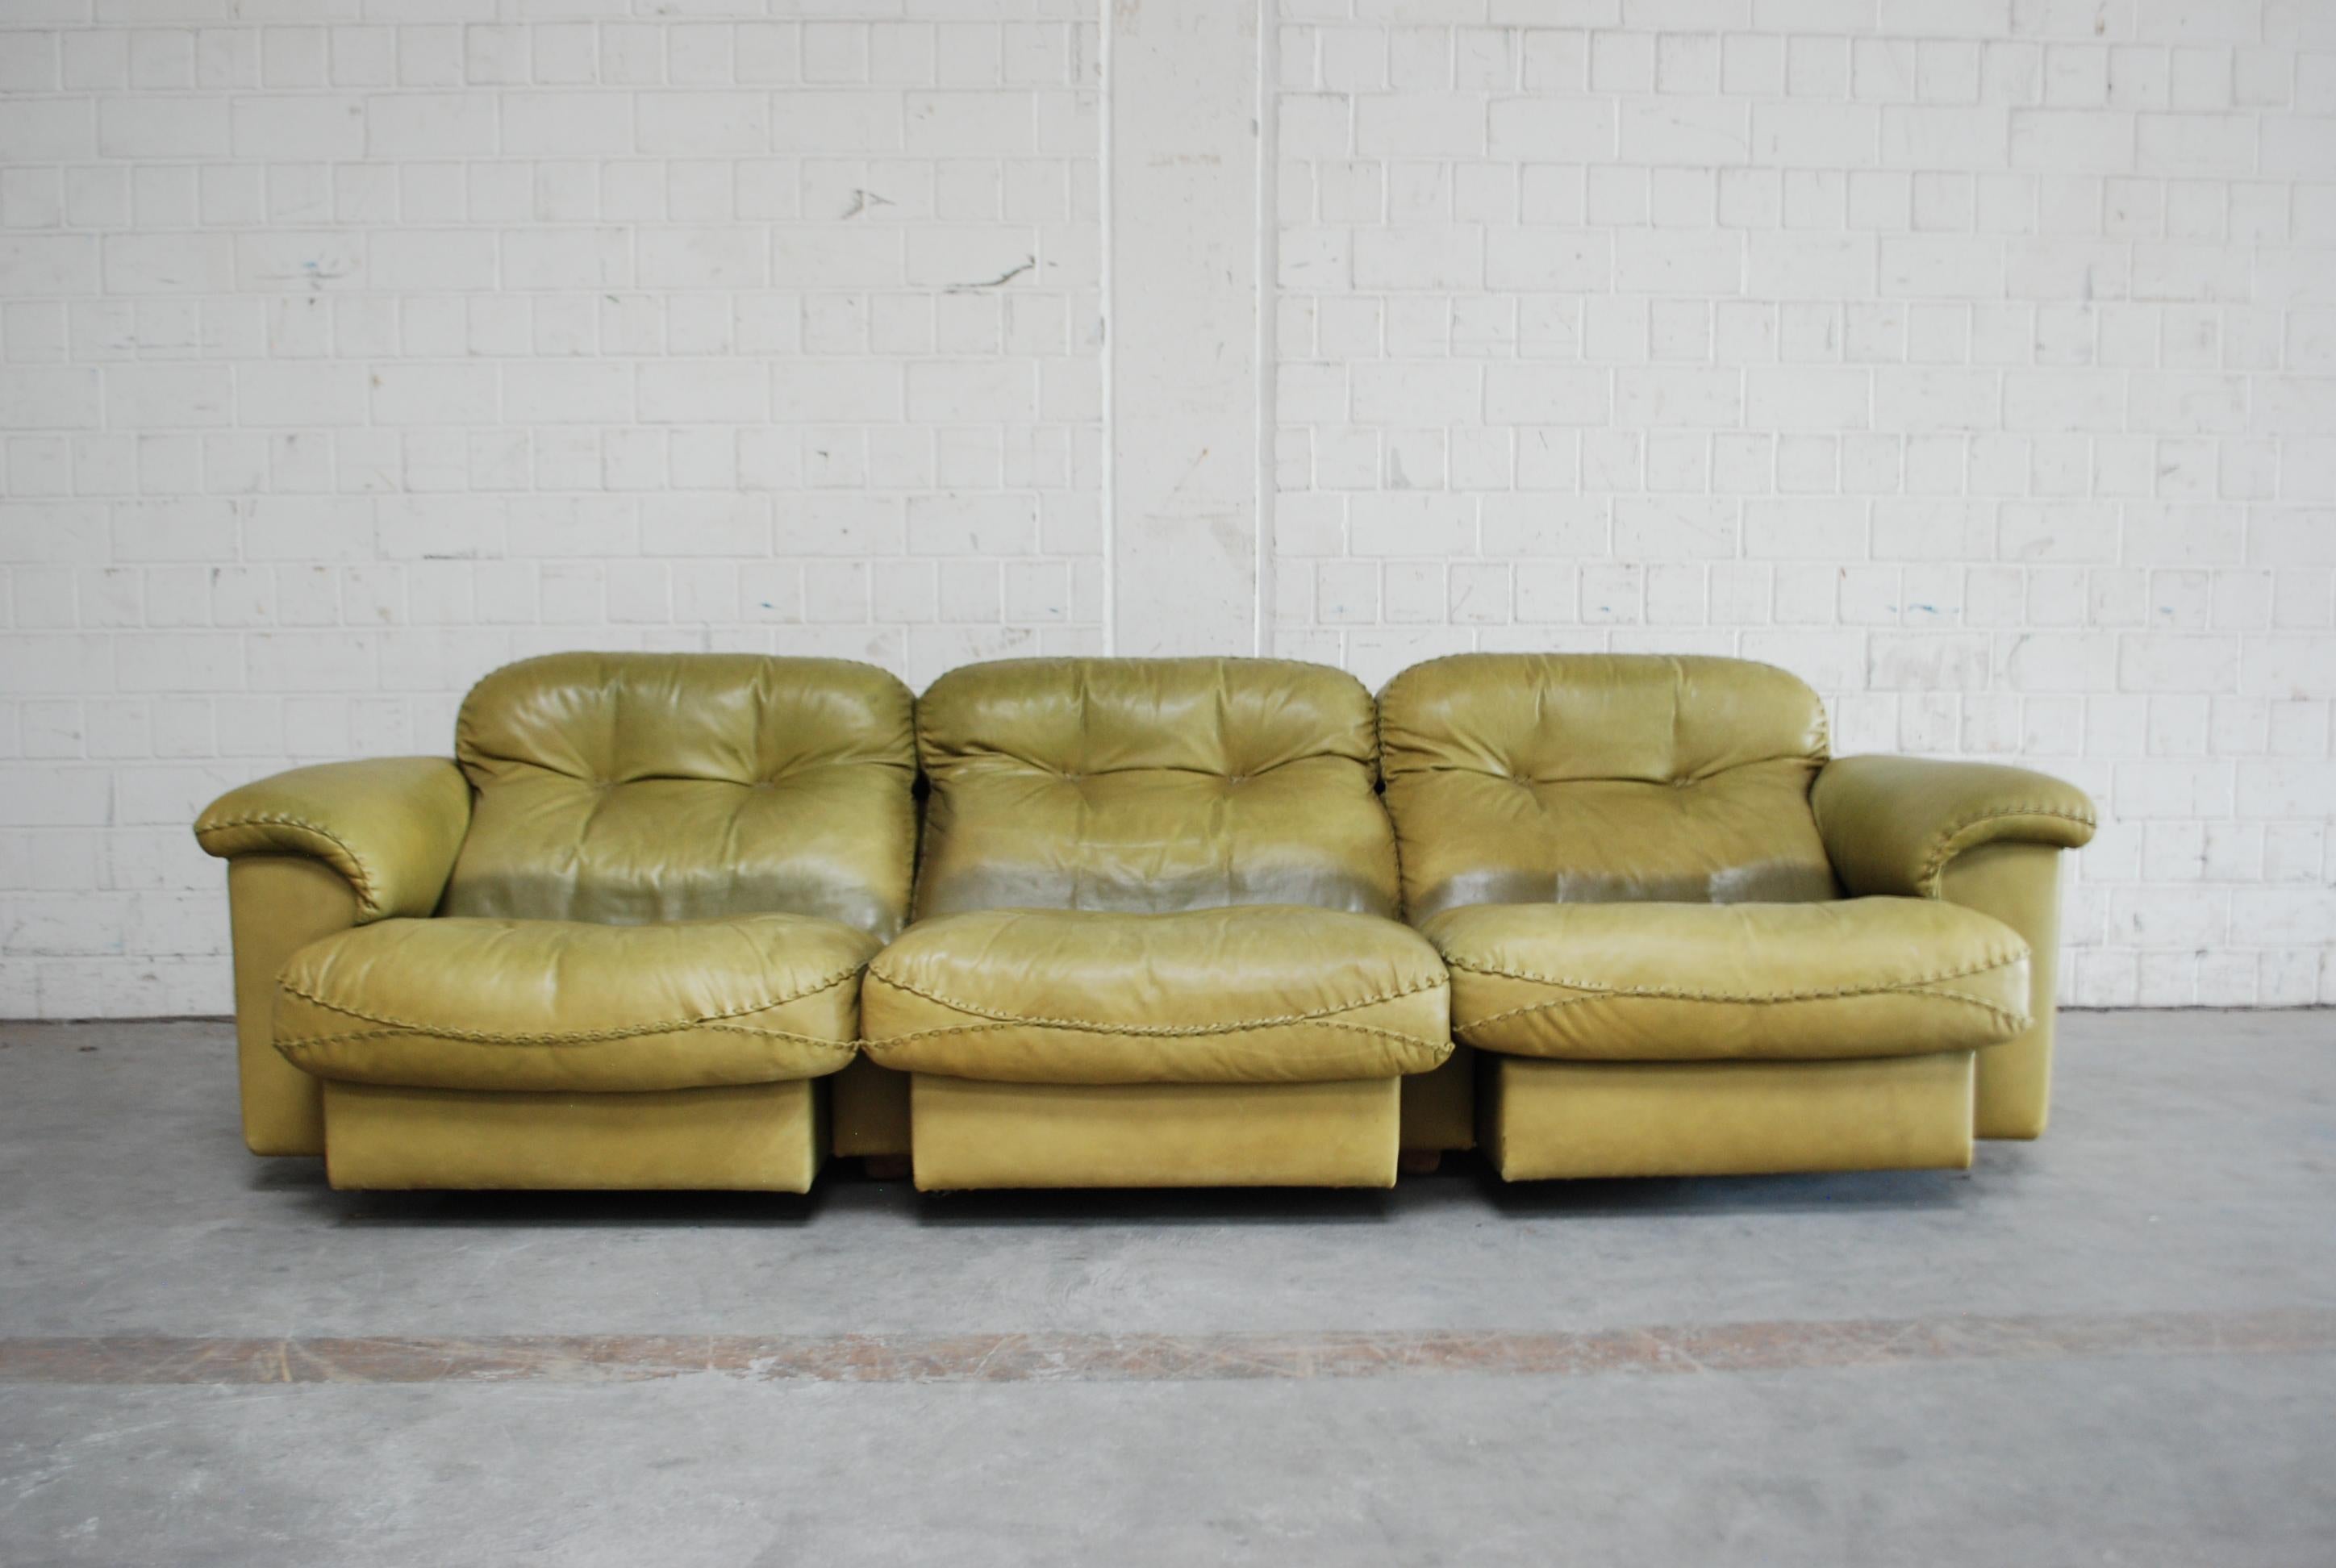 De Sede James Bond Leather Sofa DS 101 Olive Green In Good Condition For Sale In Munich, Bavaria